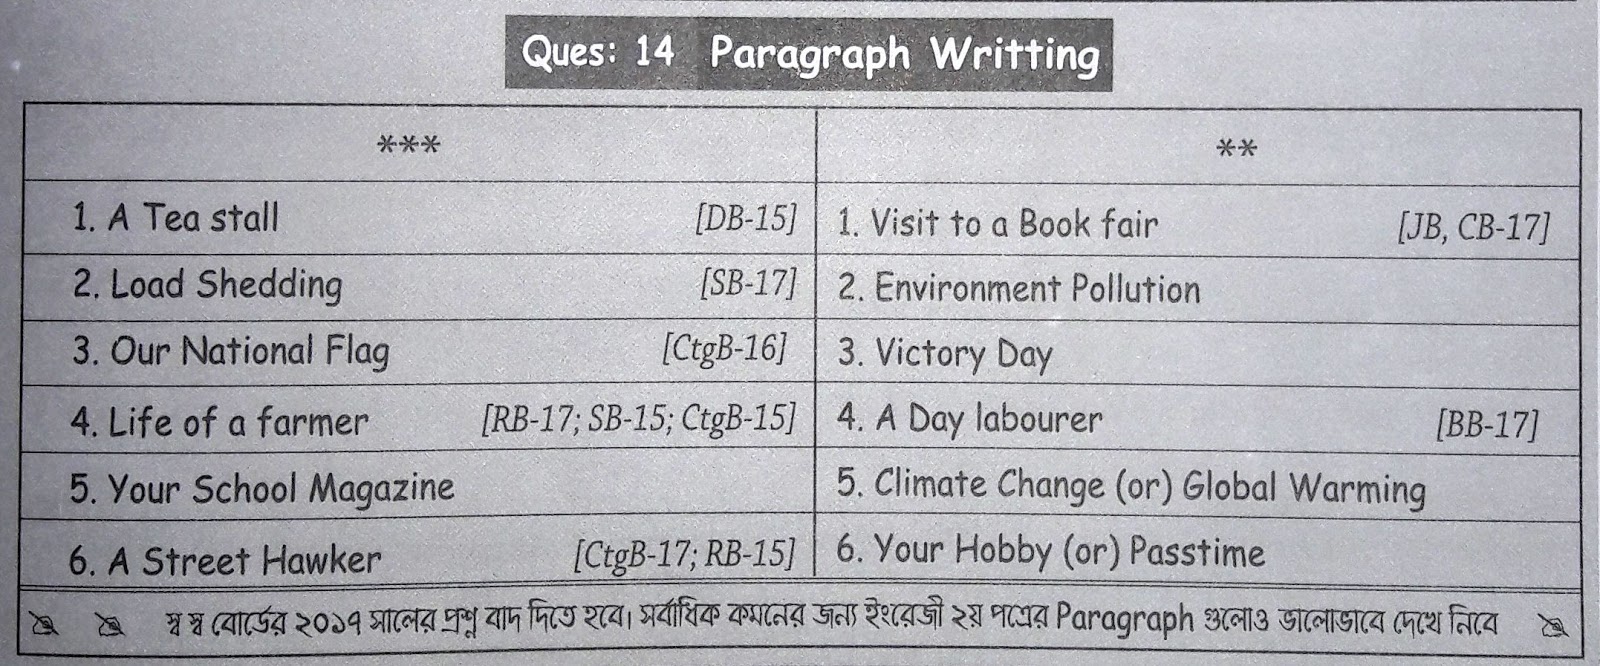 ssc English 2nd Paper suggestion, question paper, model question, mcq question, question pattern, syllabus for dhaka board, all boards